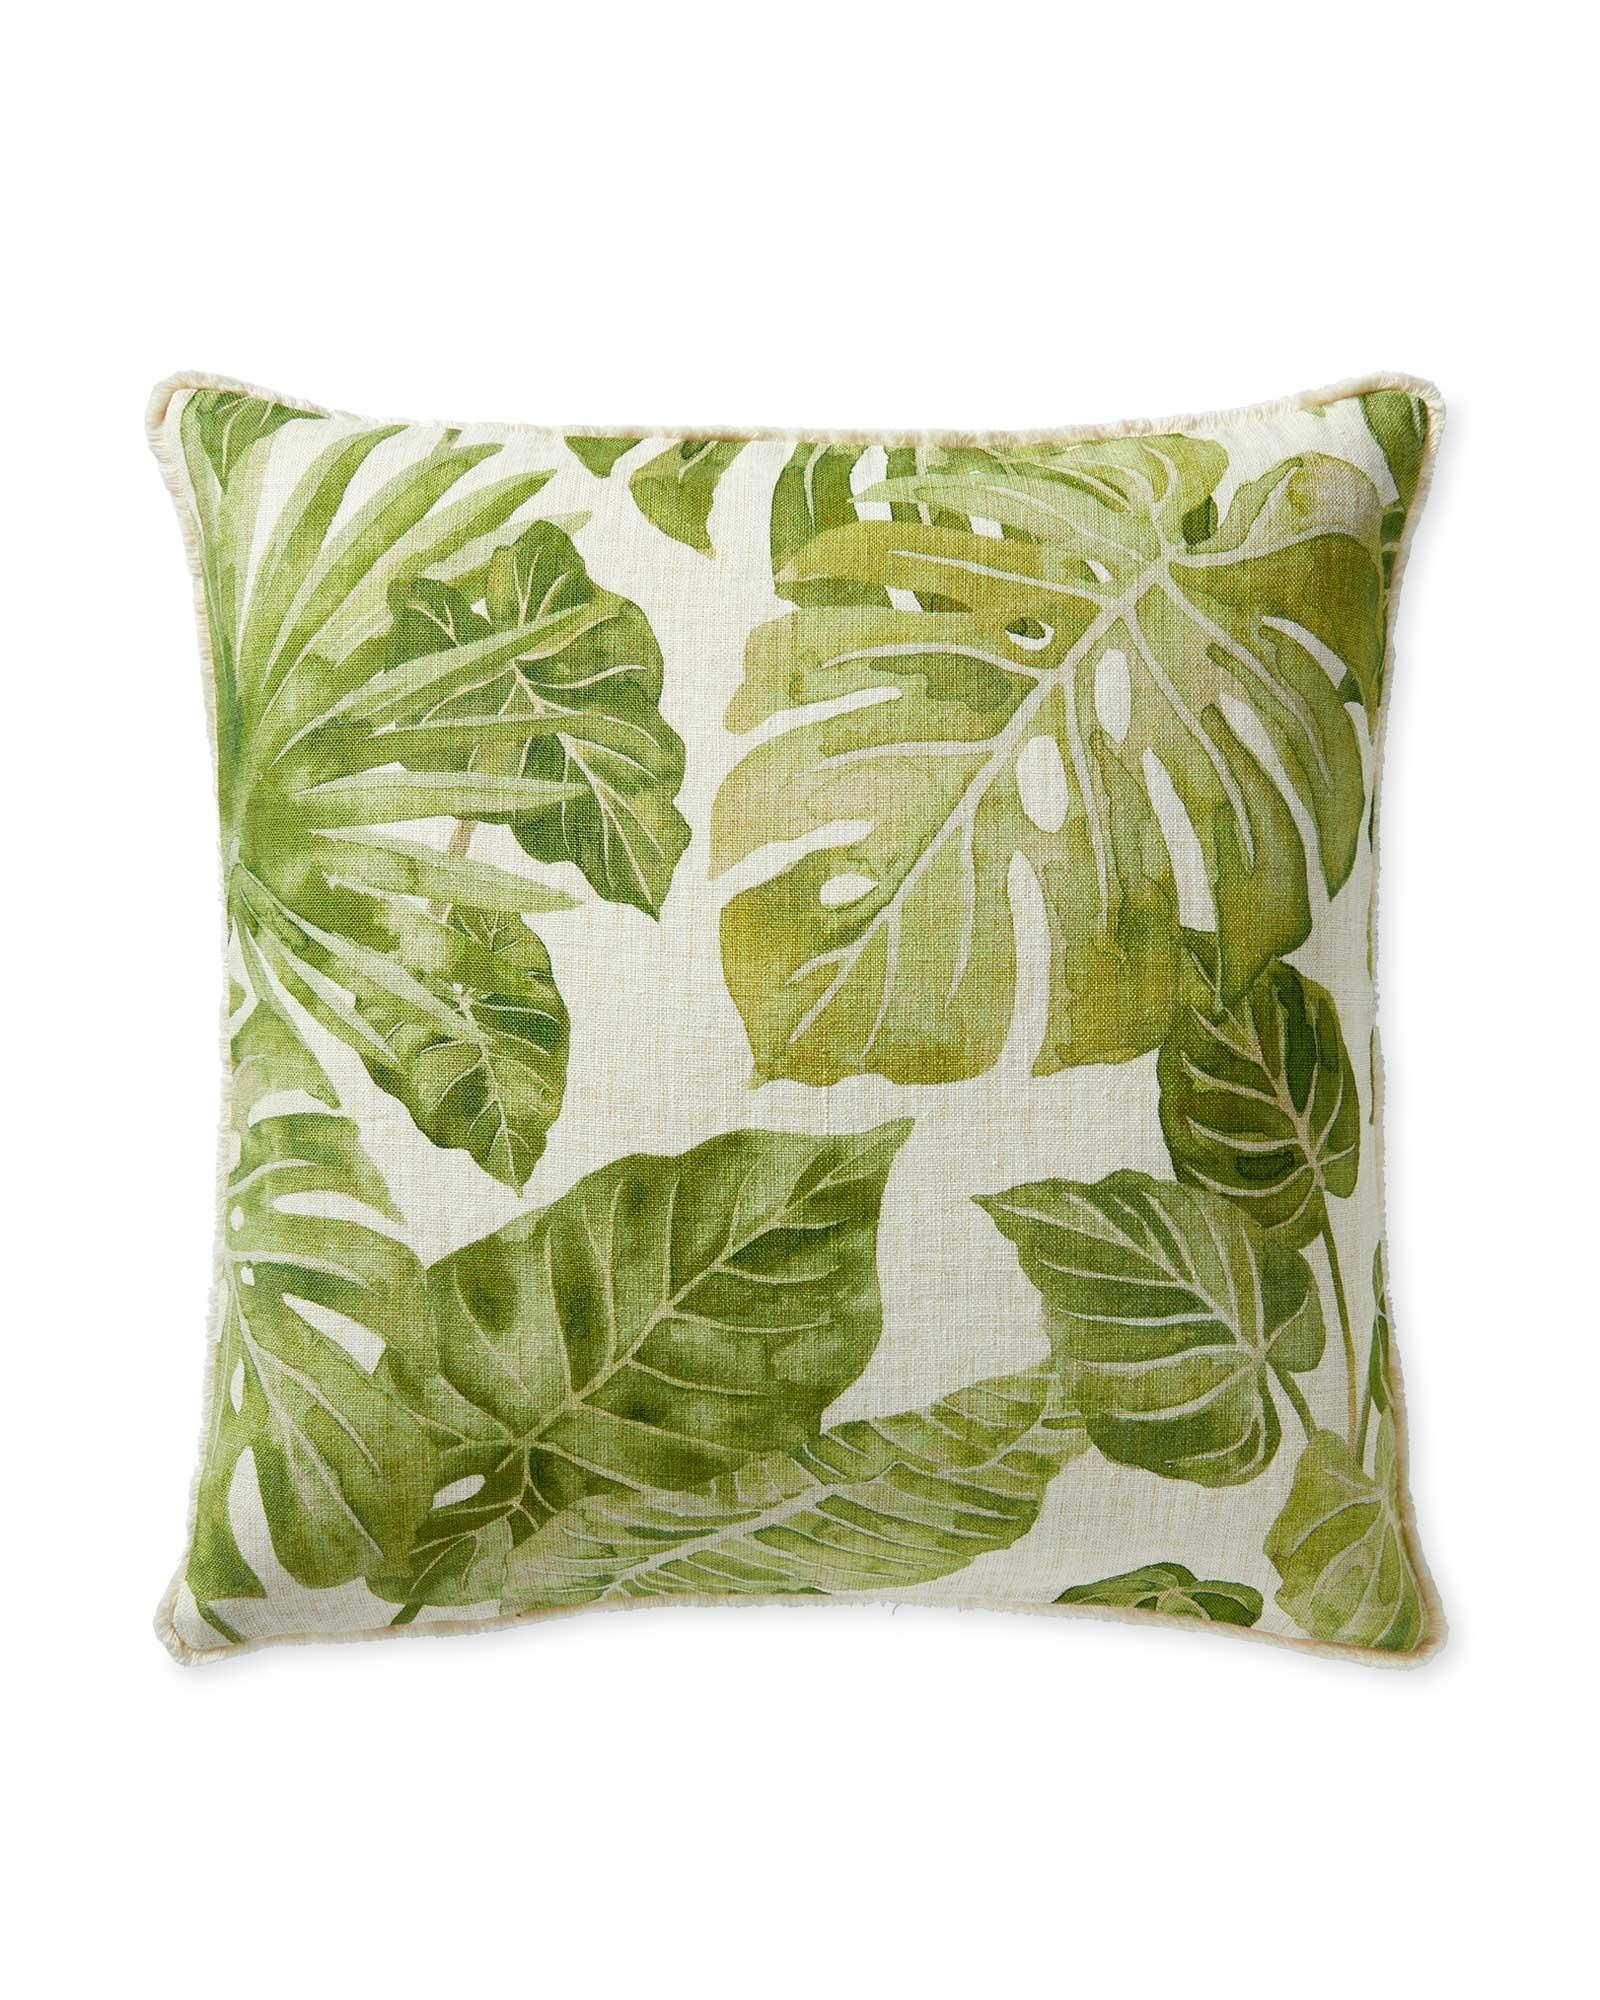 Montego Pillow Cover | Serena and Lily